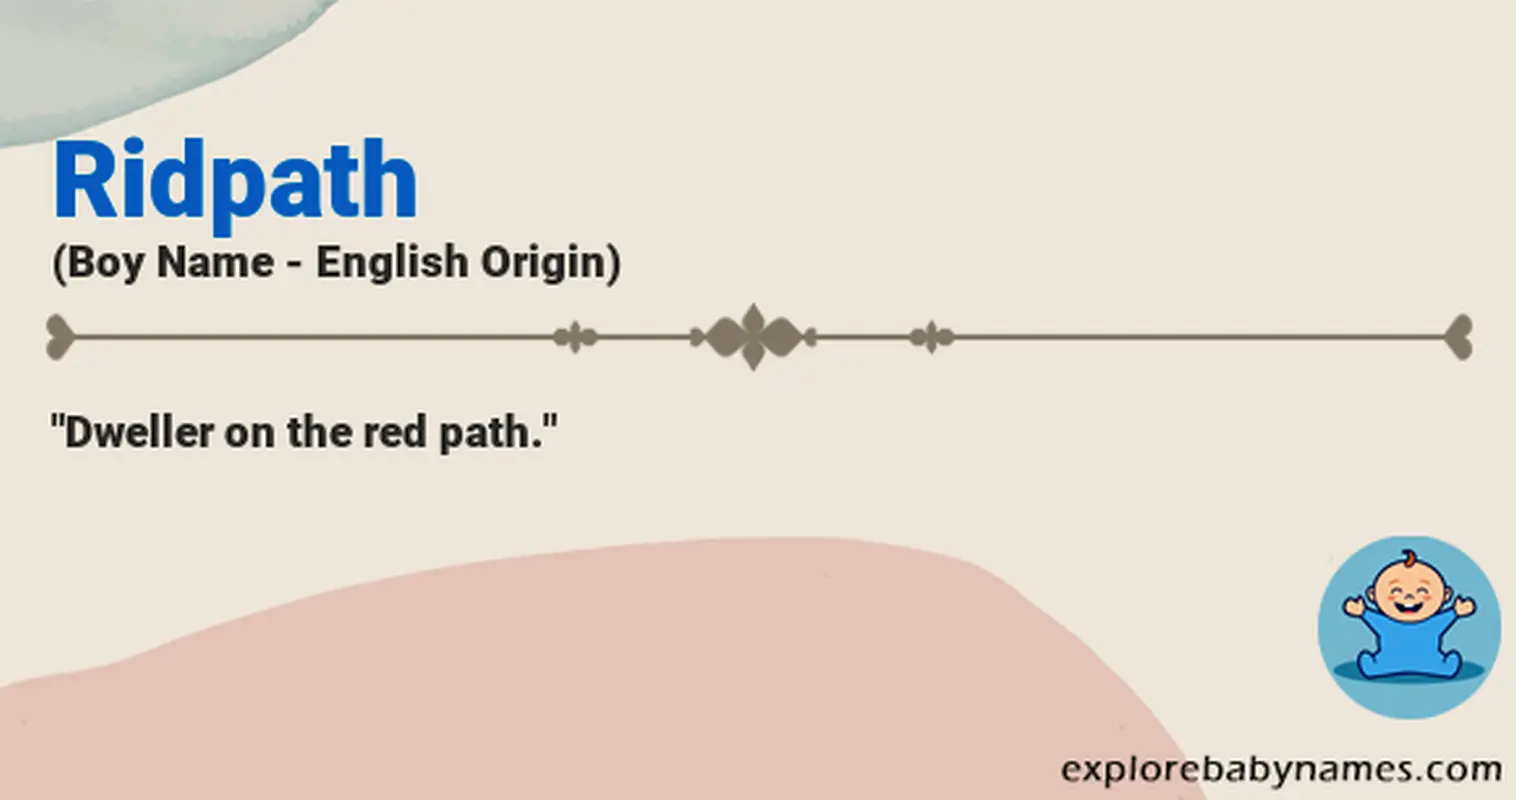 Meaning of Ridpath